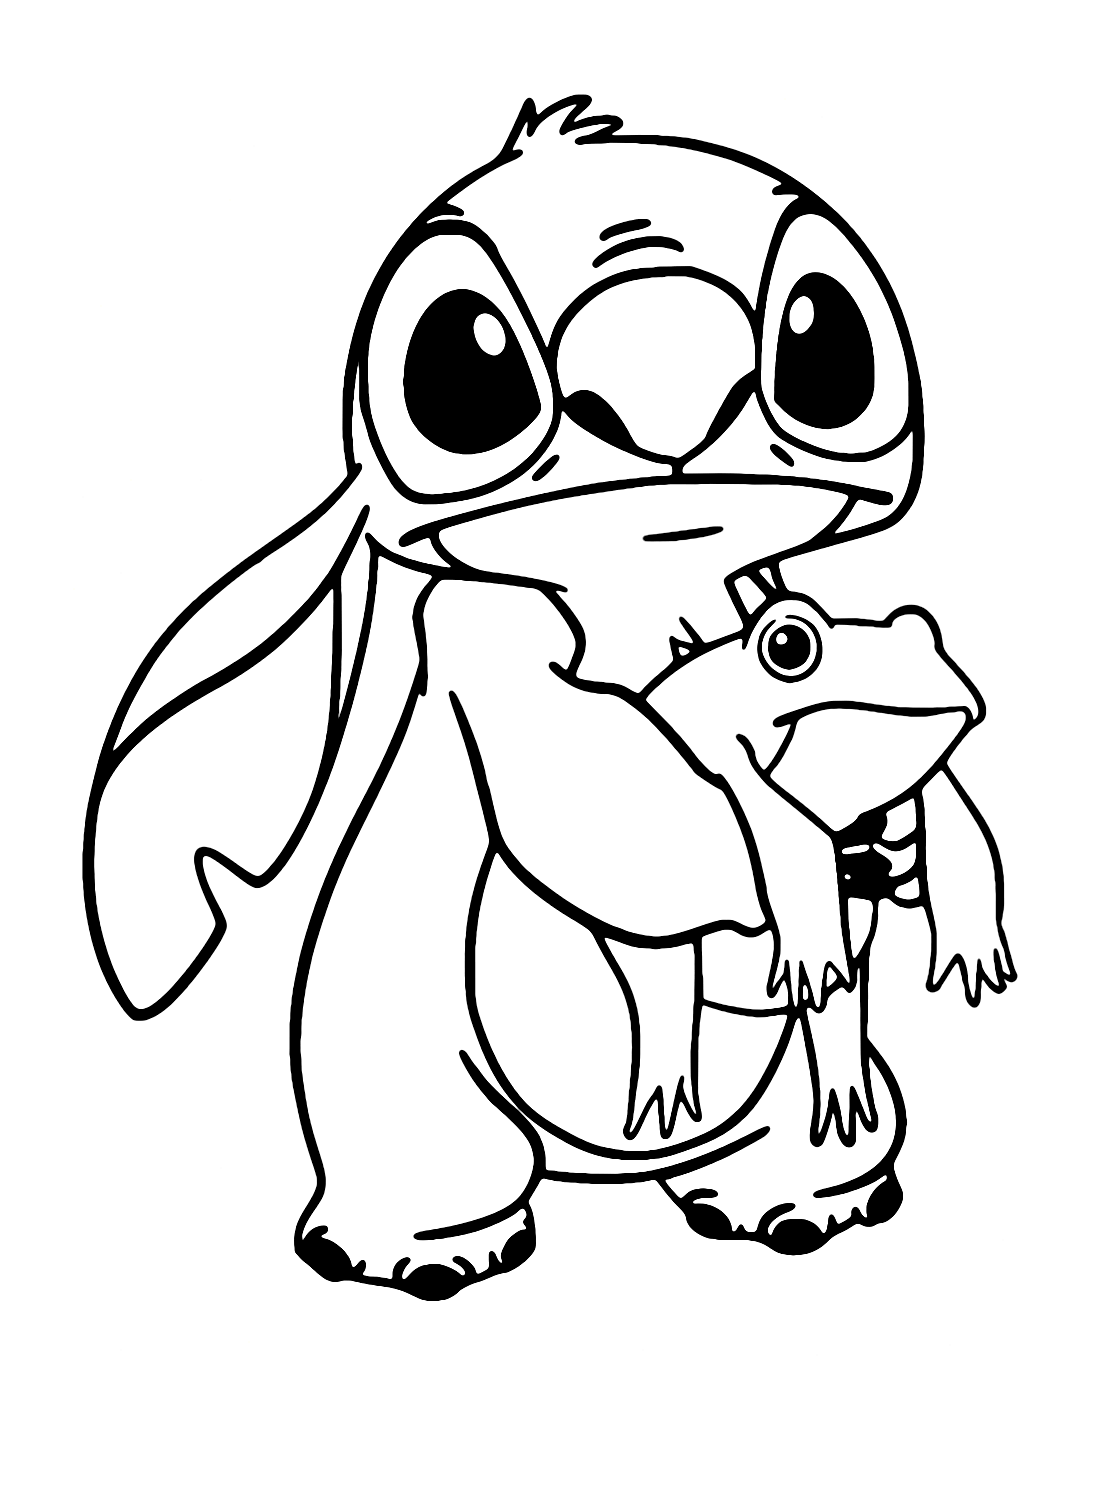 Stitch Coloring Pages Free Coloring Pages